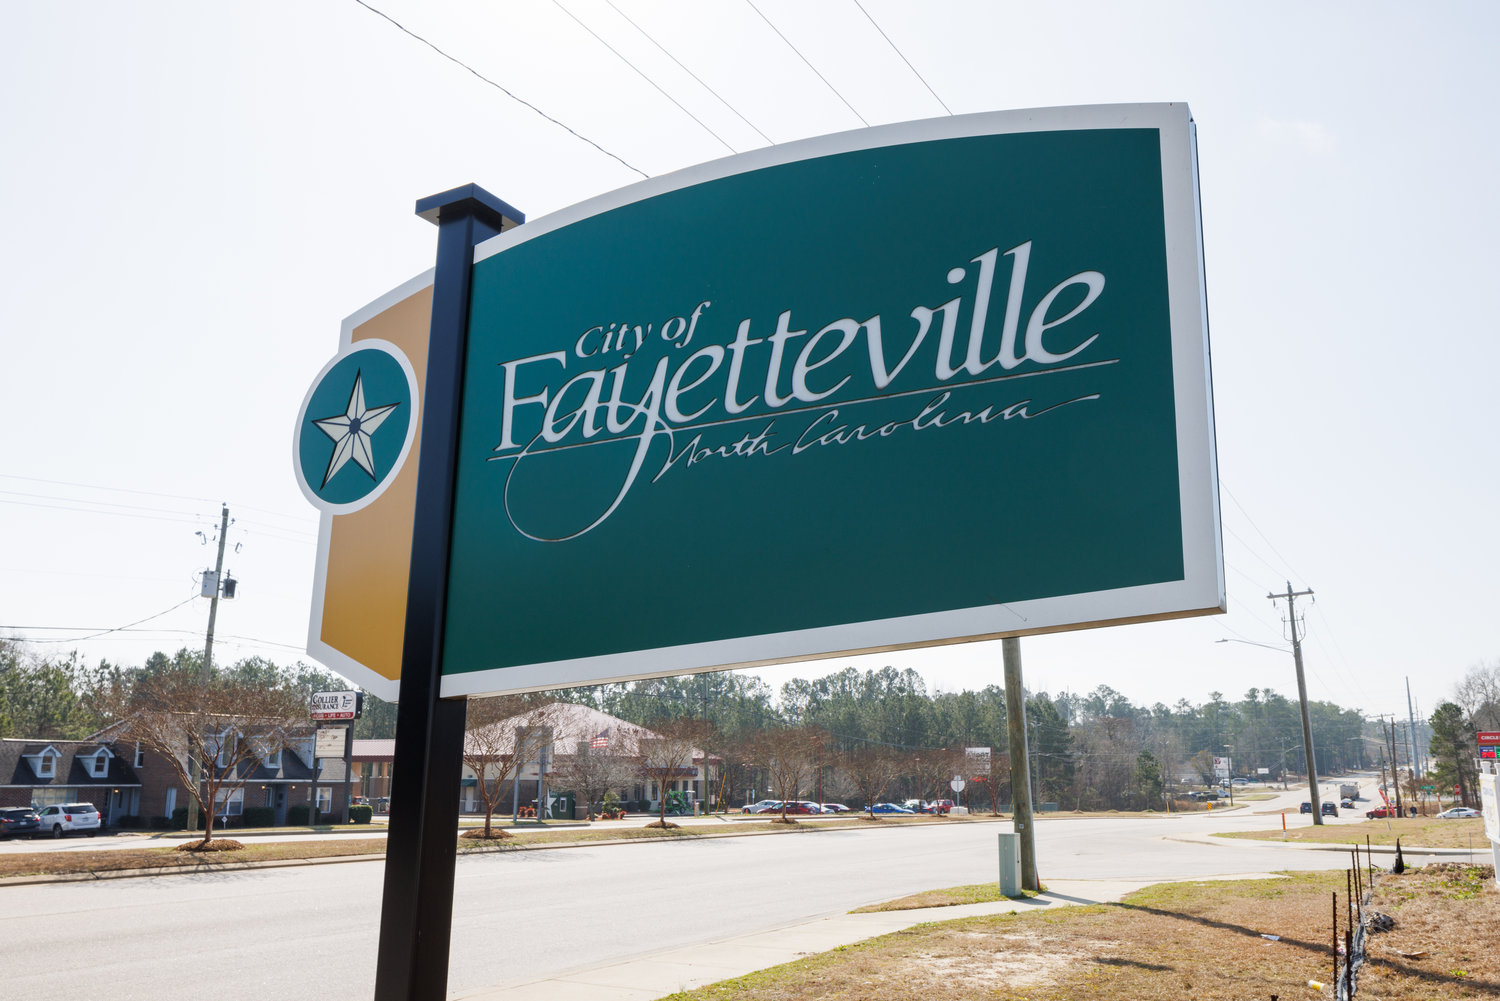 Several city boards and commissions have vacancies that Fayetteville residents can apply for.